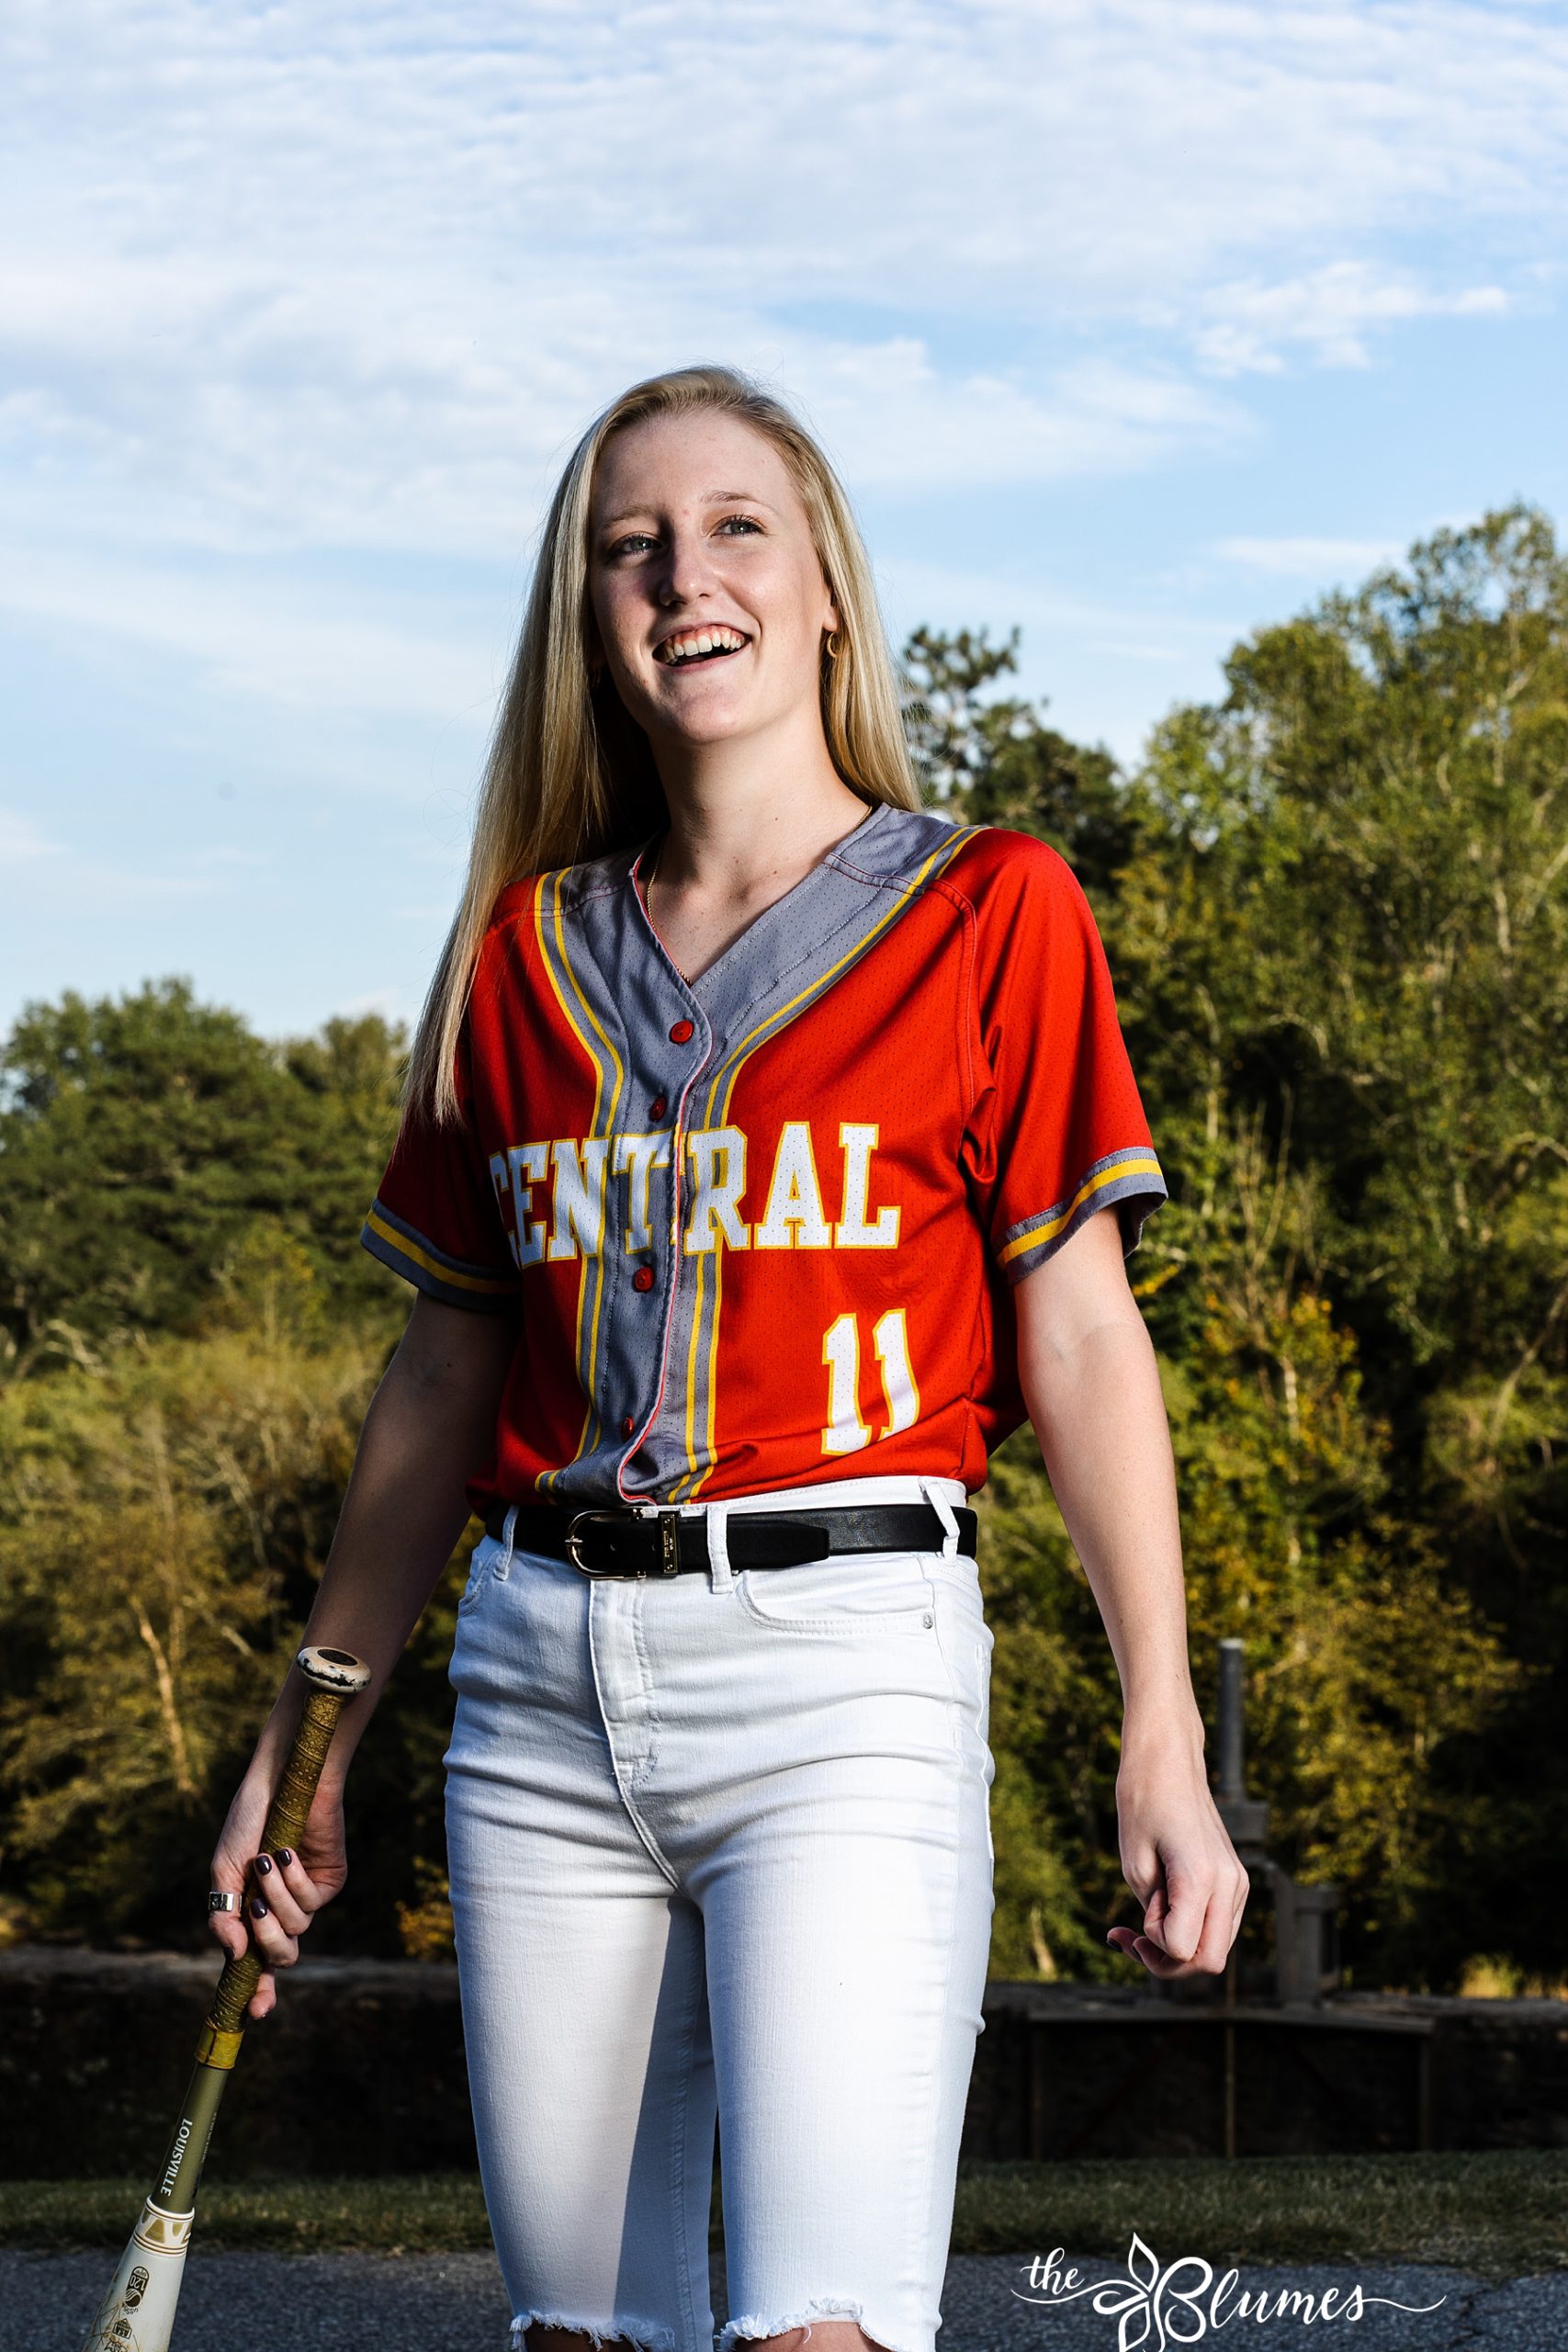 Kinsey plays softball at Clarke Central HIgh